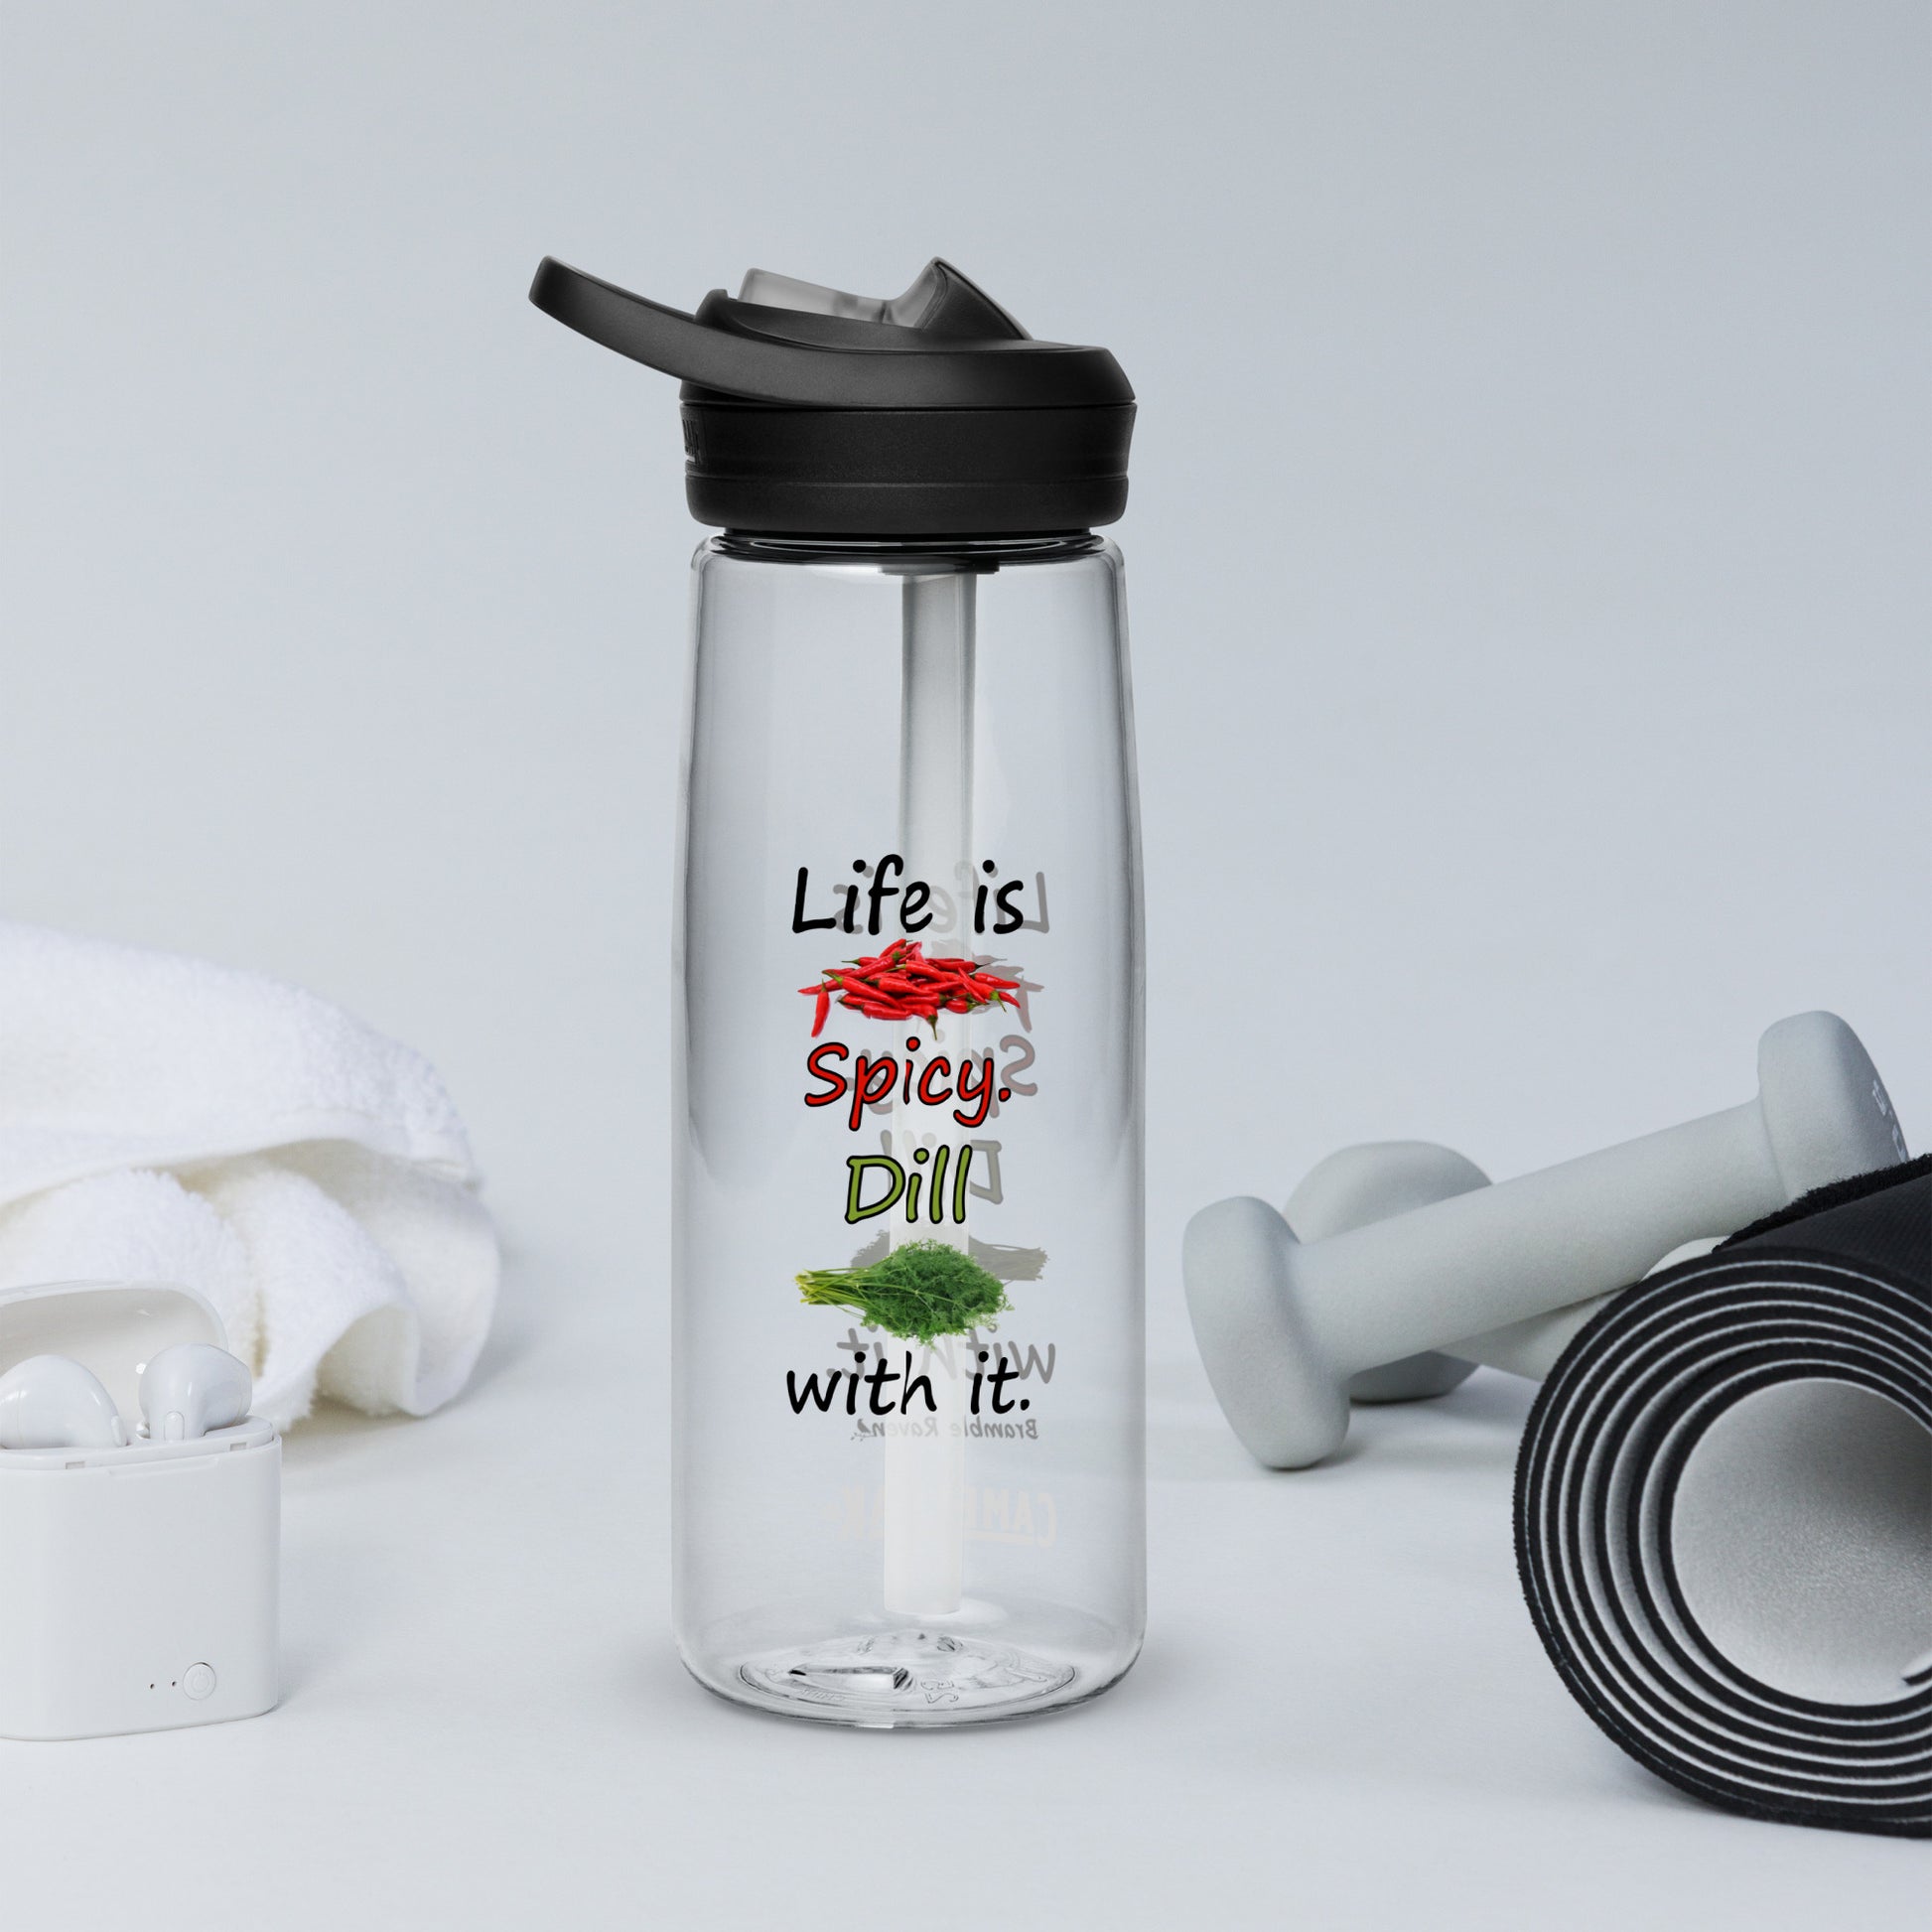 25 ounce sports water bottle with spill-proof lid and bite valve. Clear stain and odor-resistant BPA-free plastic. Features double-sided design of "Life is spicy. Dill with it" phrase with peppers and dill weed images. Shown by yoga mat, weights, and towel.